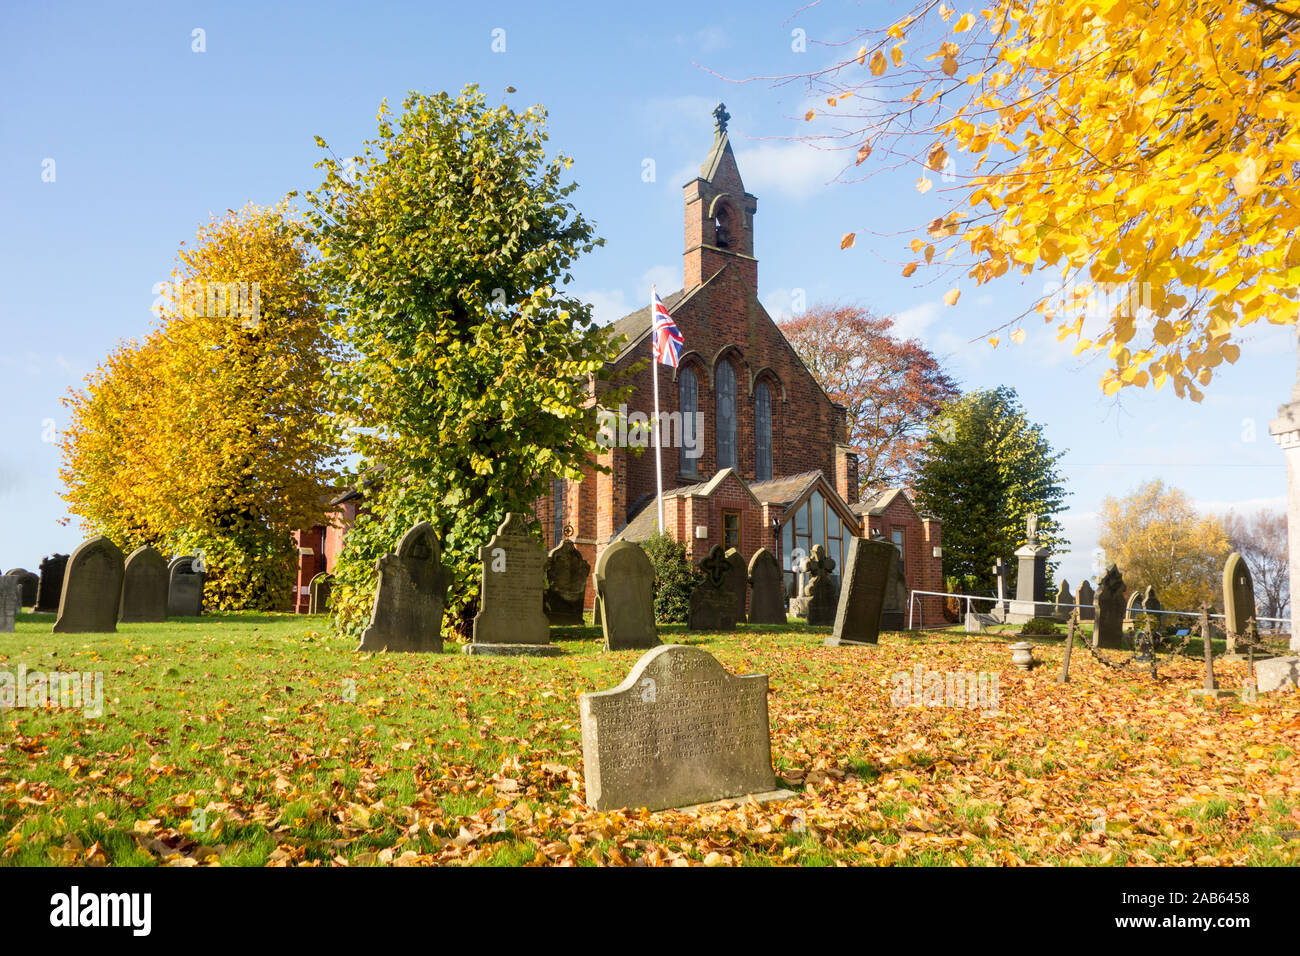 The parish church Christ Church and its churchyard with gravestones in the Cheshire village of Wheelock during autumn Stock Photo